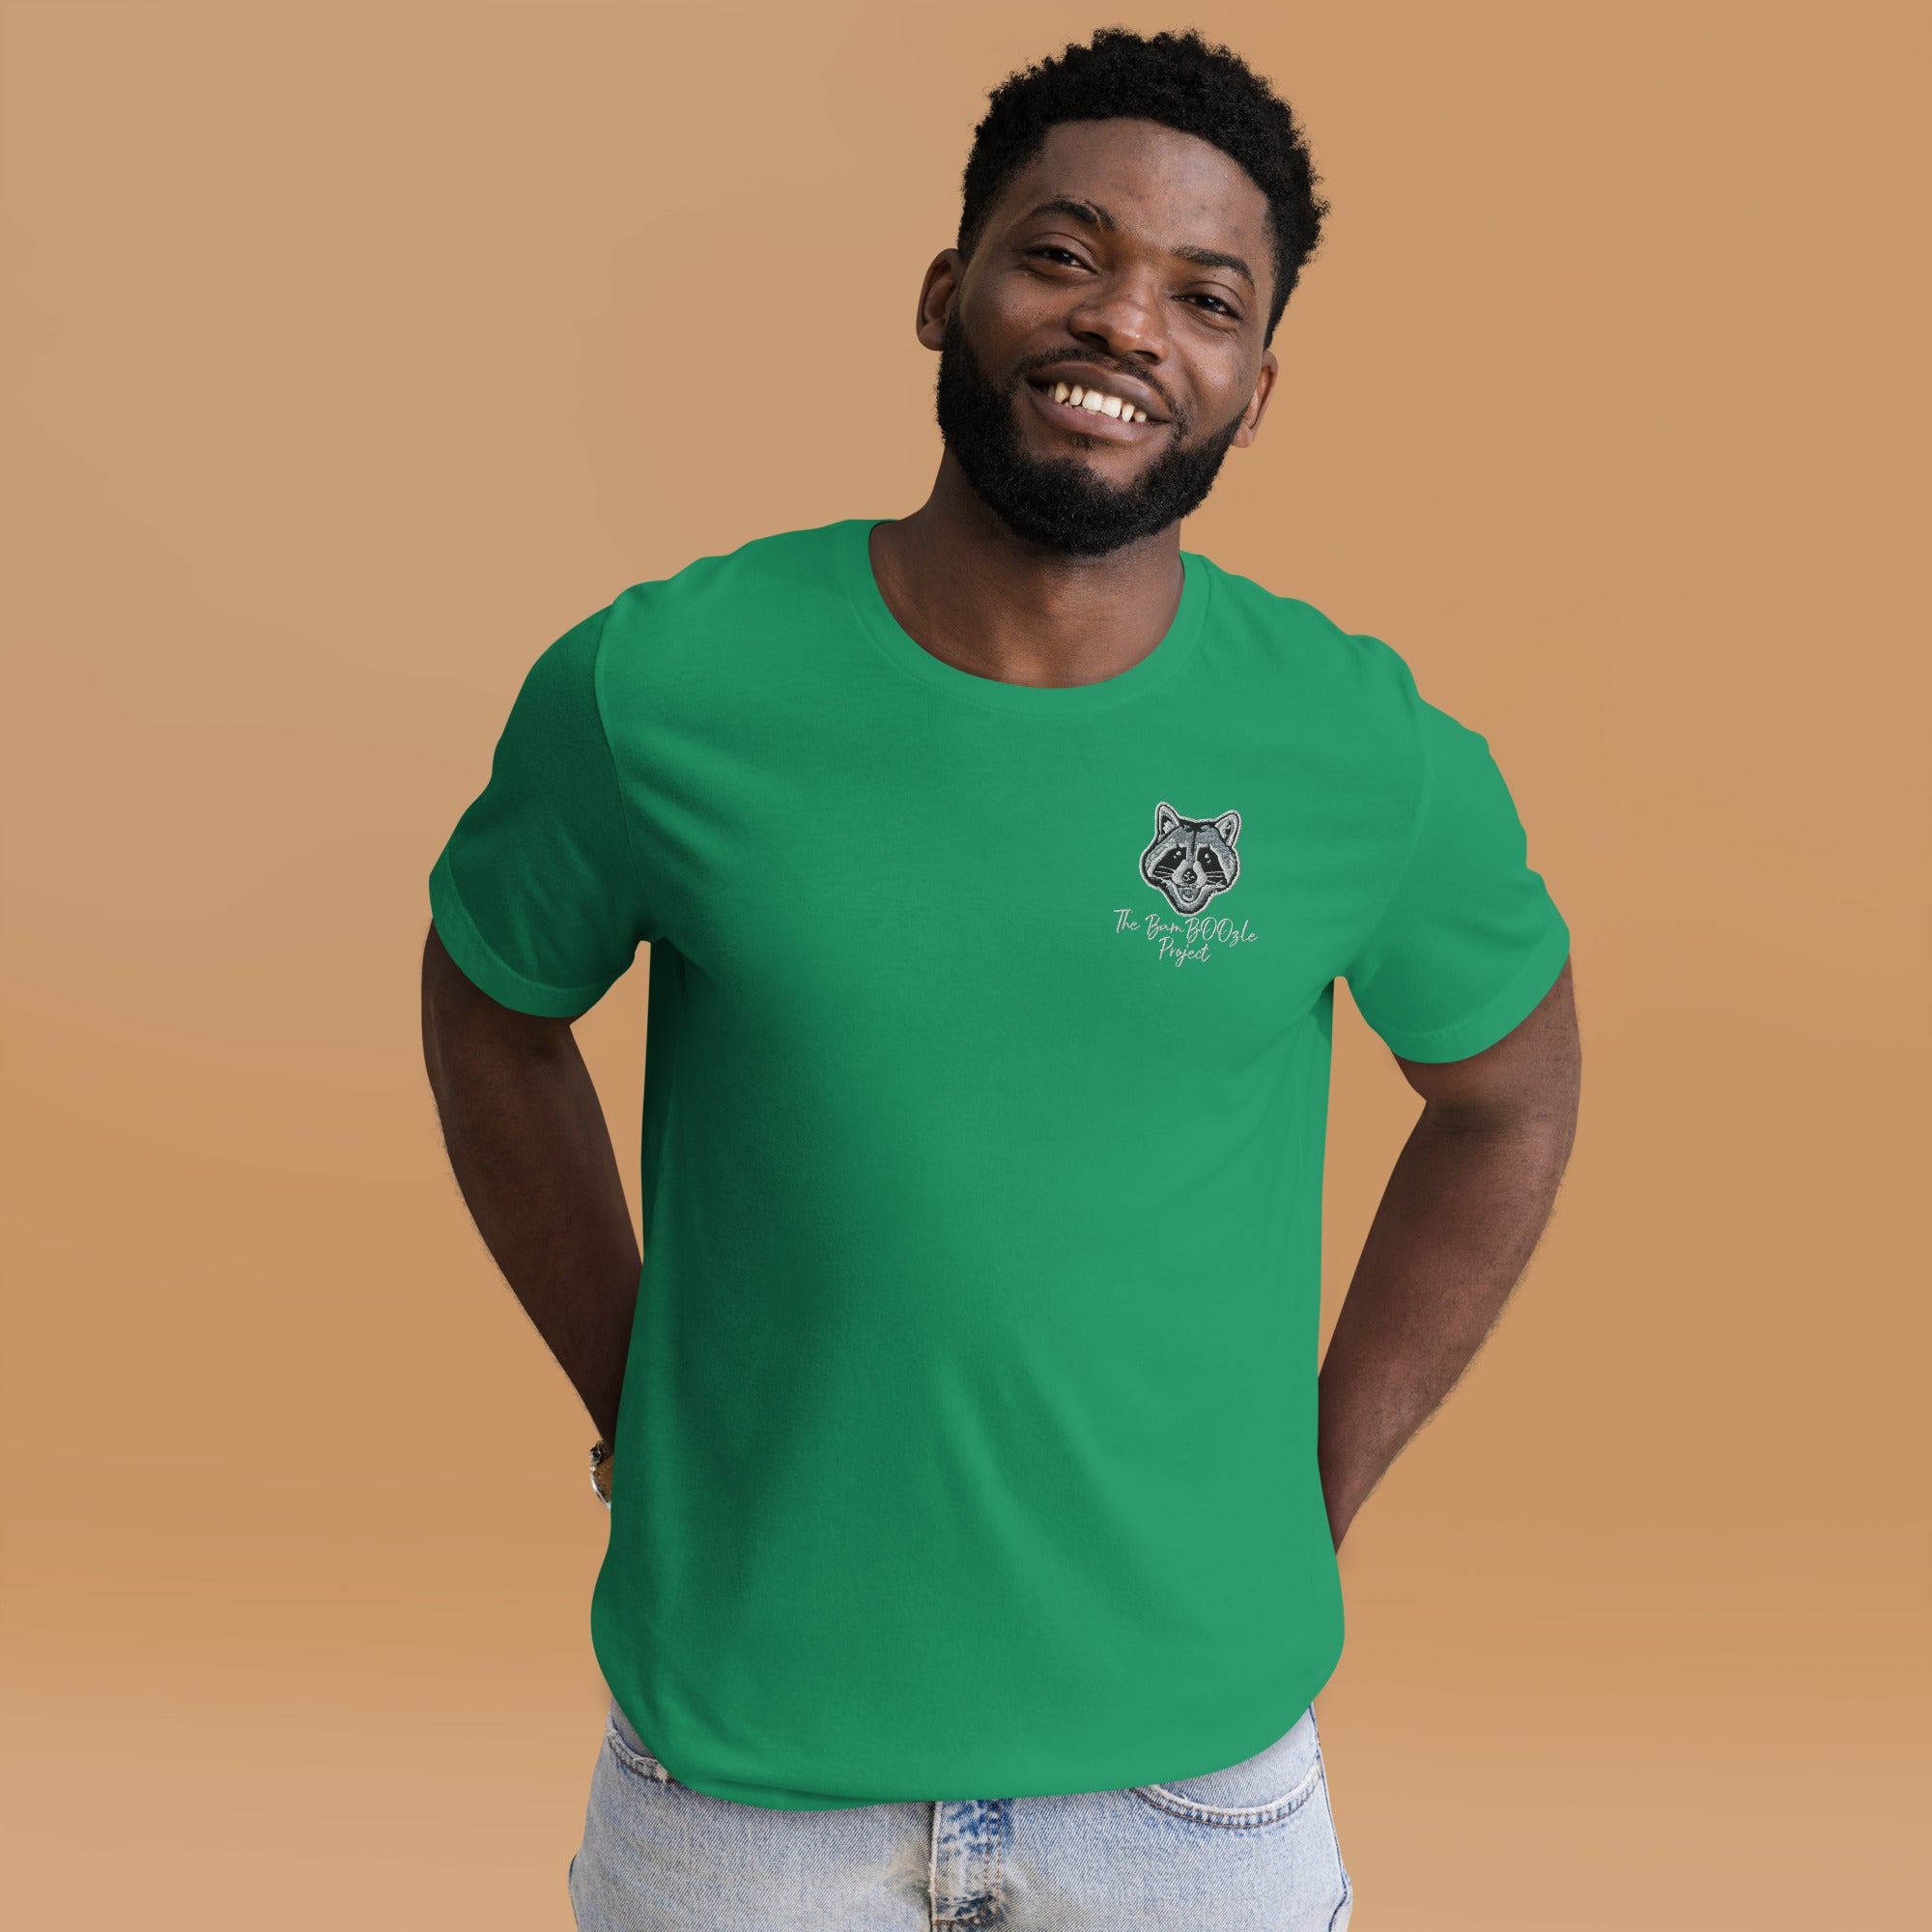 Scooter the Looter Embroidered Unisex T-shirt